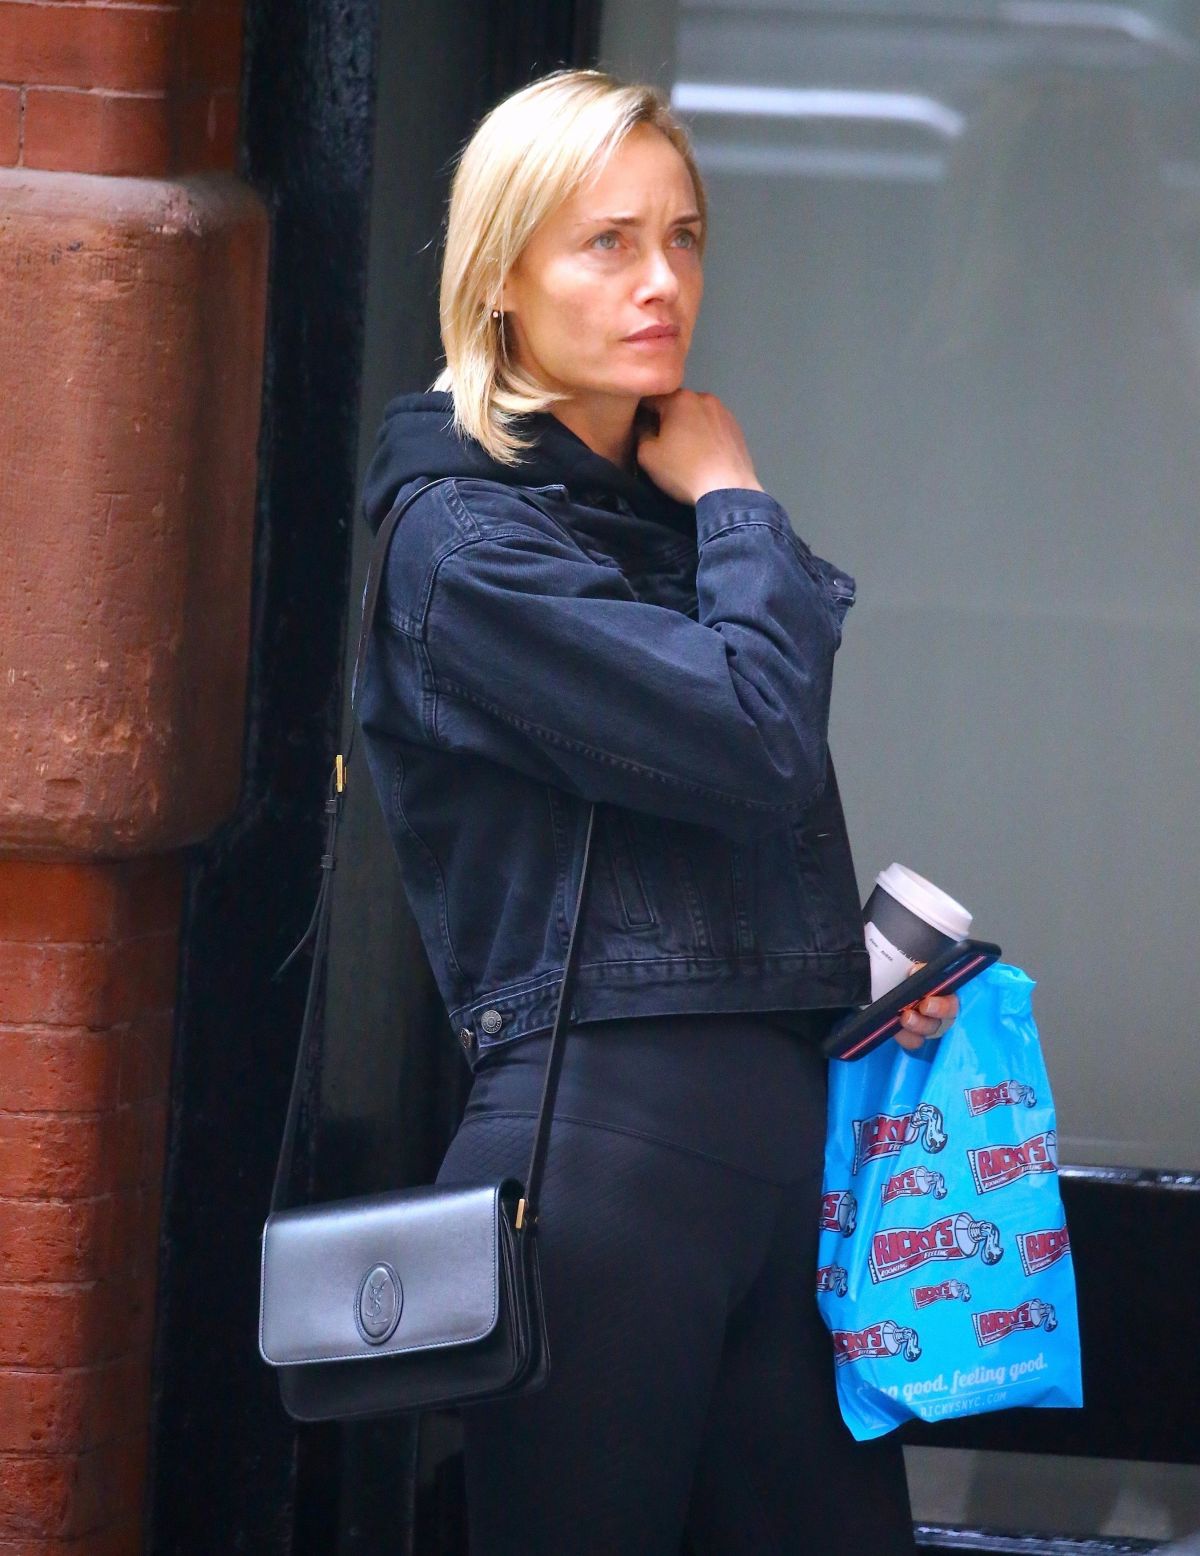 amber-valletta-and-anthony-vaccarello-out-in-new-york-05-04-2019-4.jpg